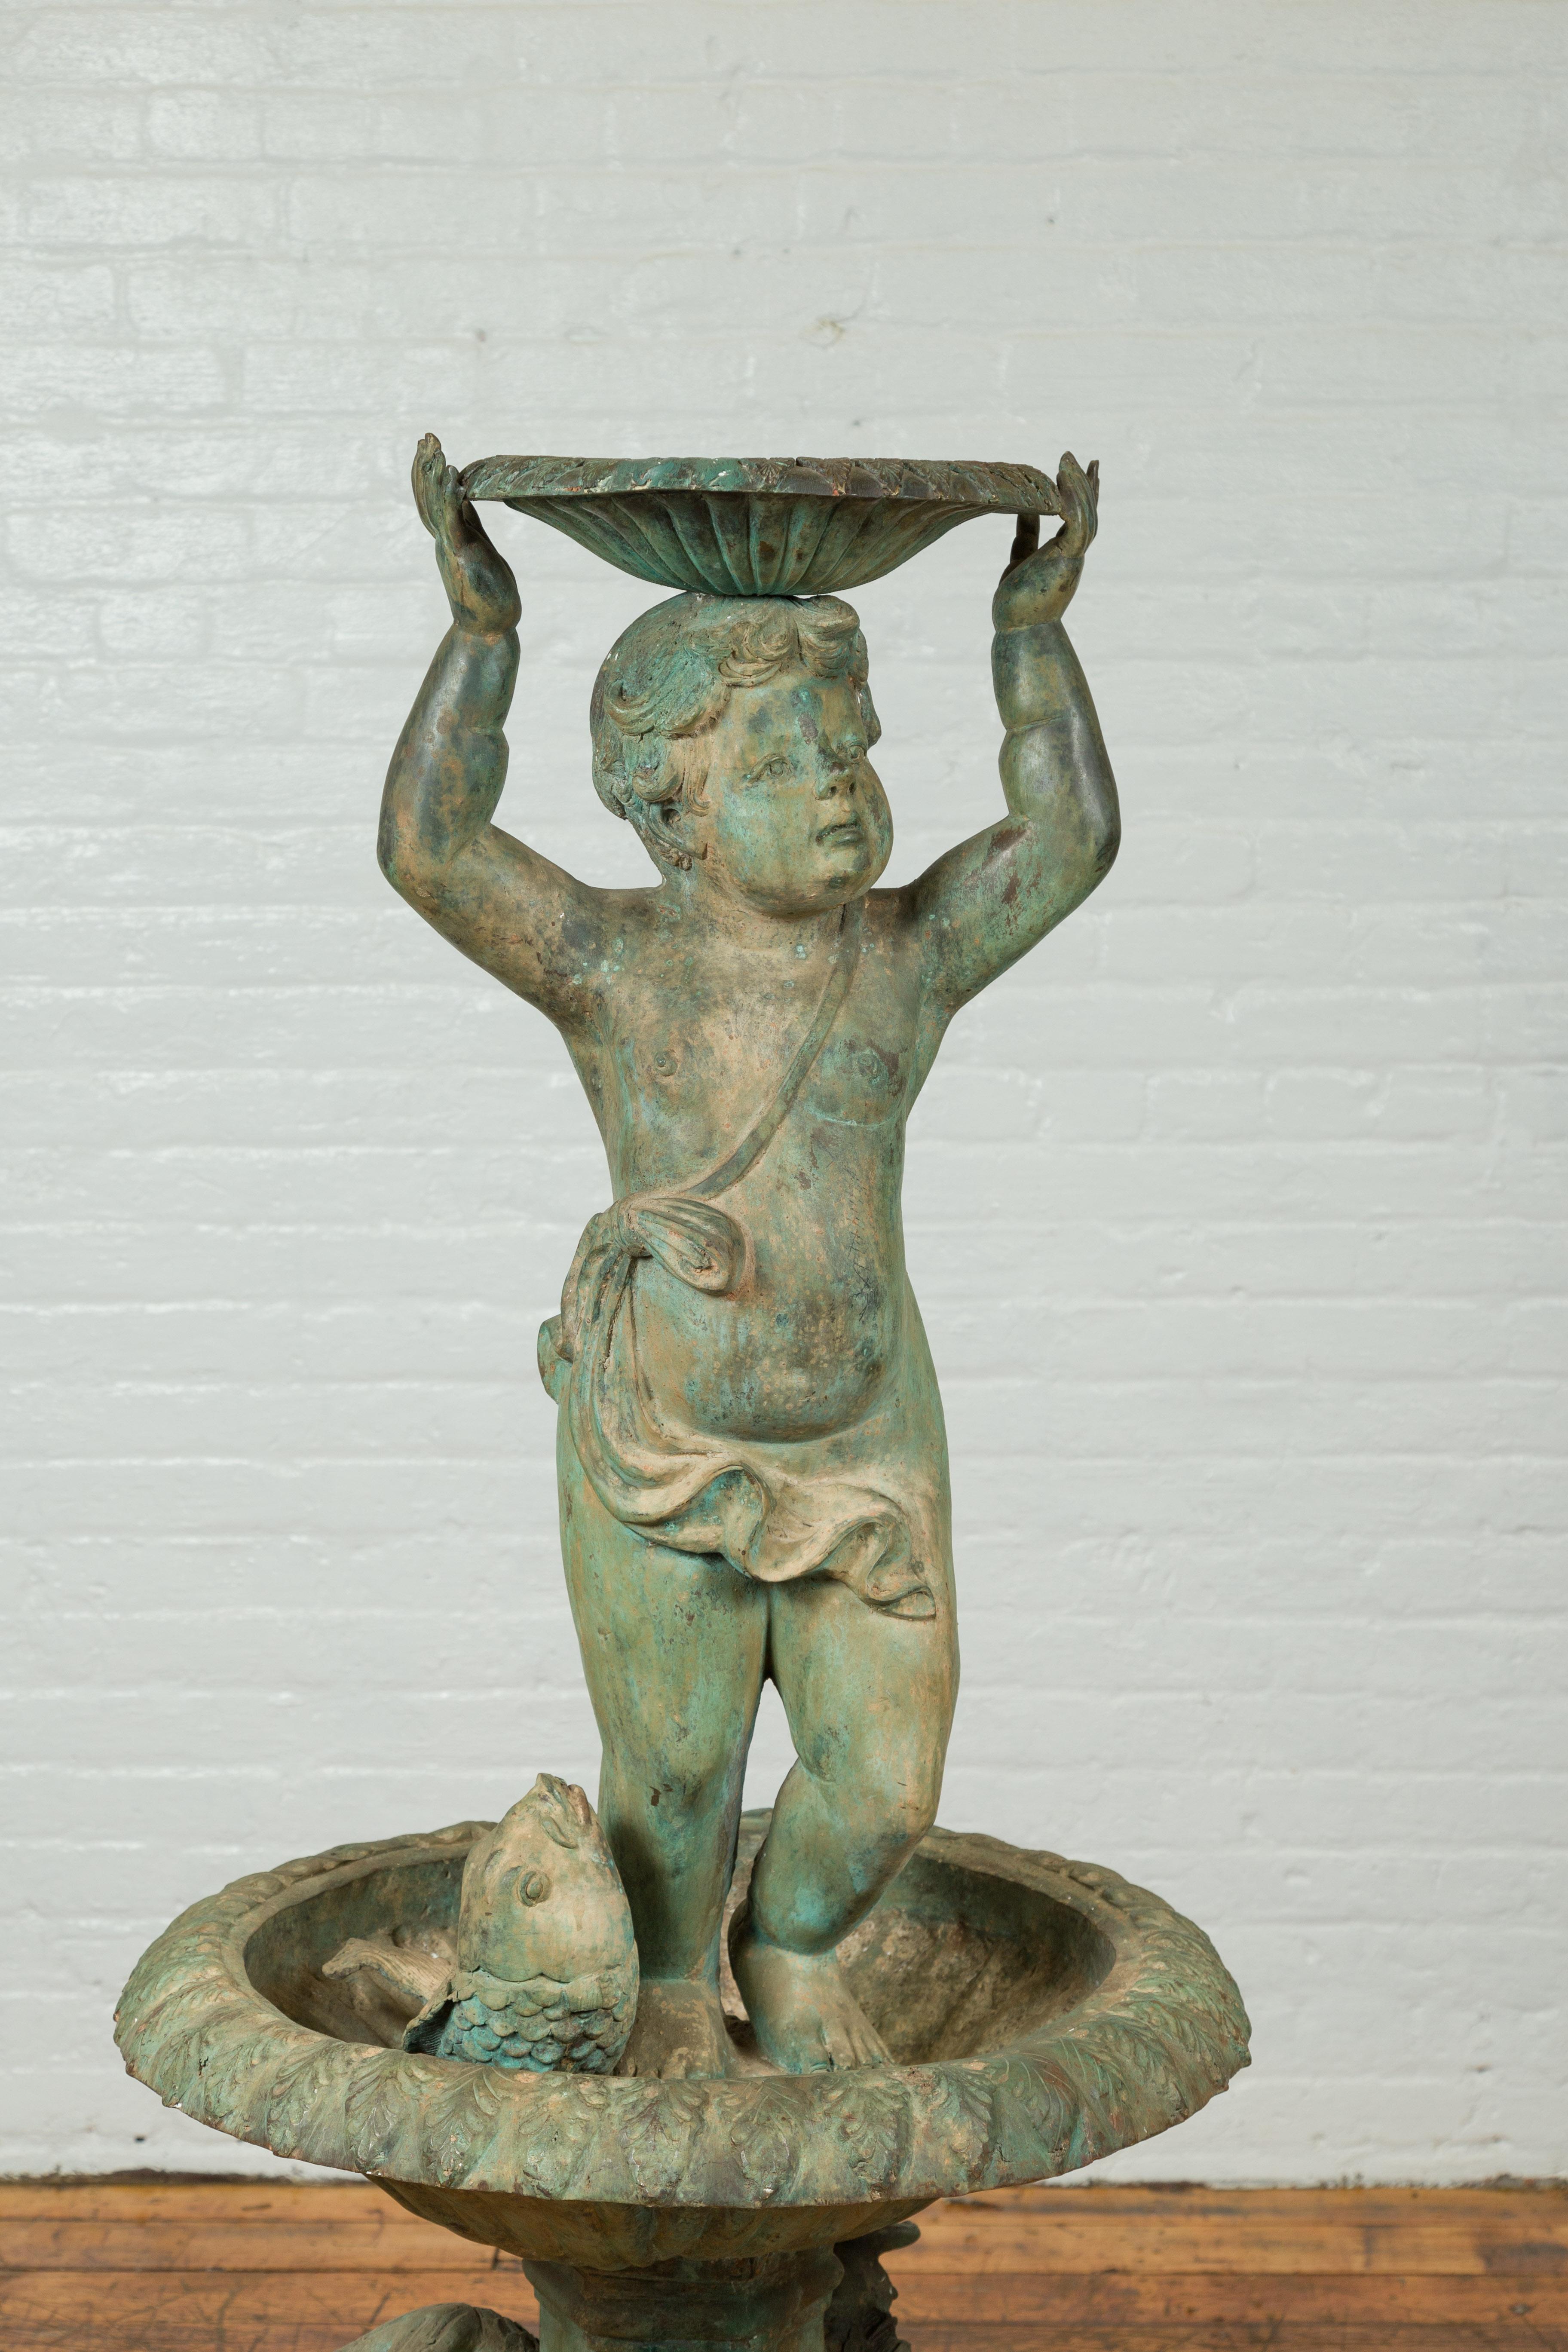 A Greco Roman style vintage putto fountain with distressed verde patina, basin and fish motifs. Created with the traditional technique of the lost-wax (à la cire perdue) that allows a great precision in the details, this bronze fountain captures our